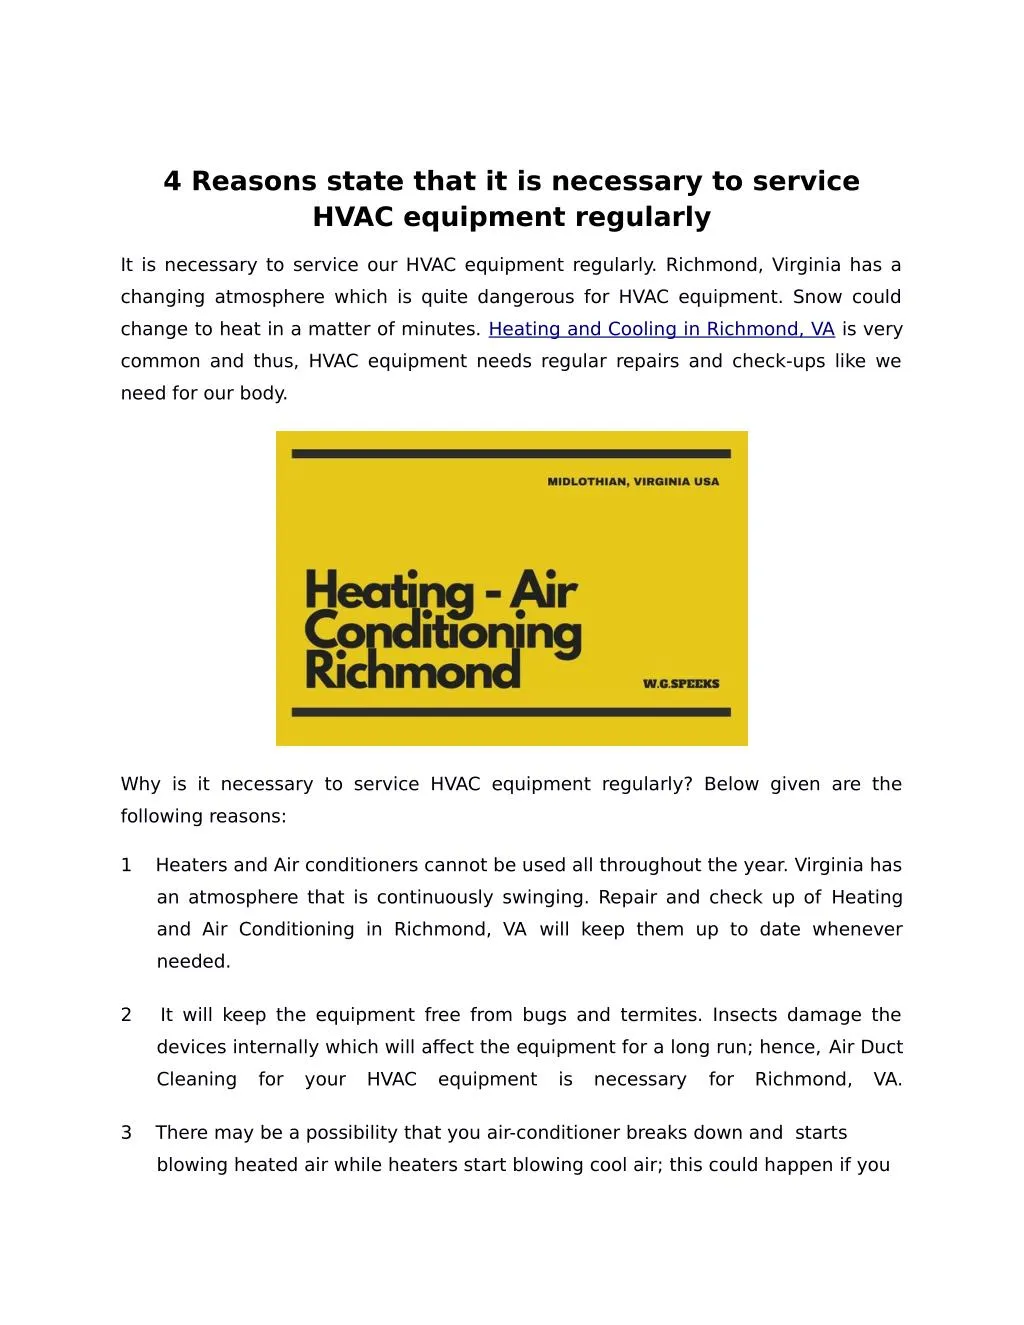 4 reasons state that it is necessary to service